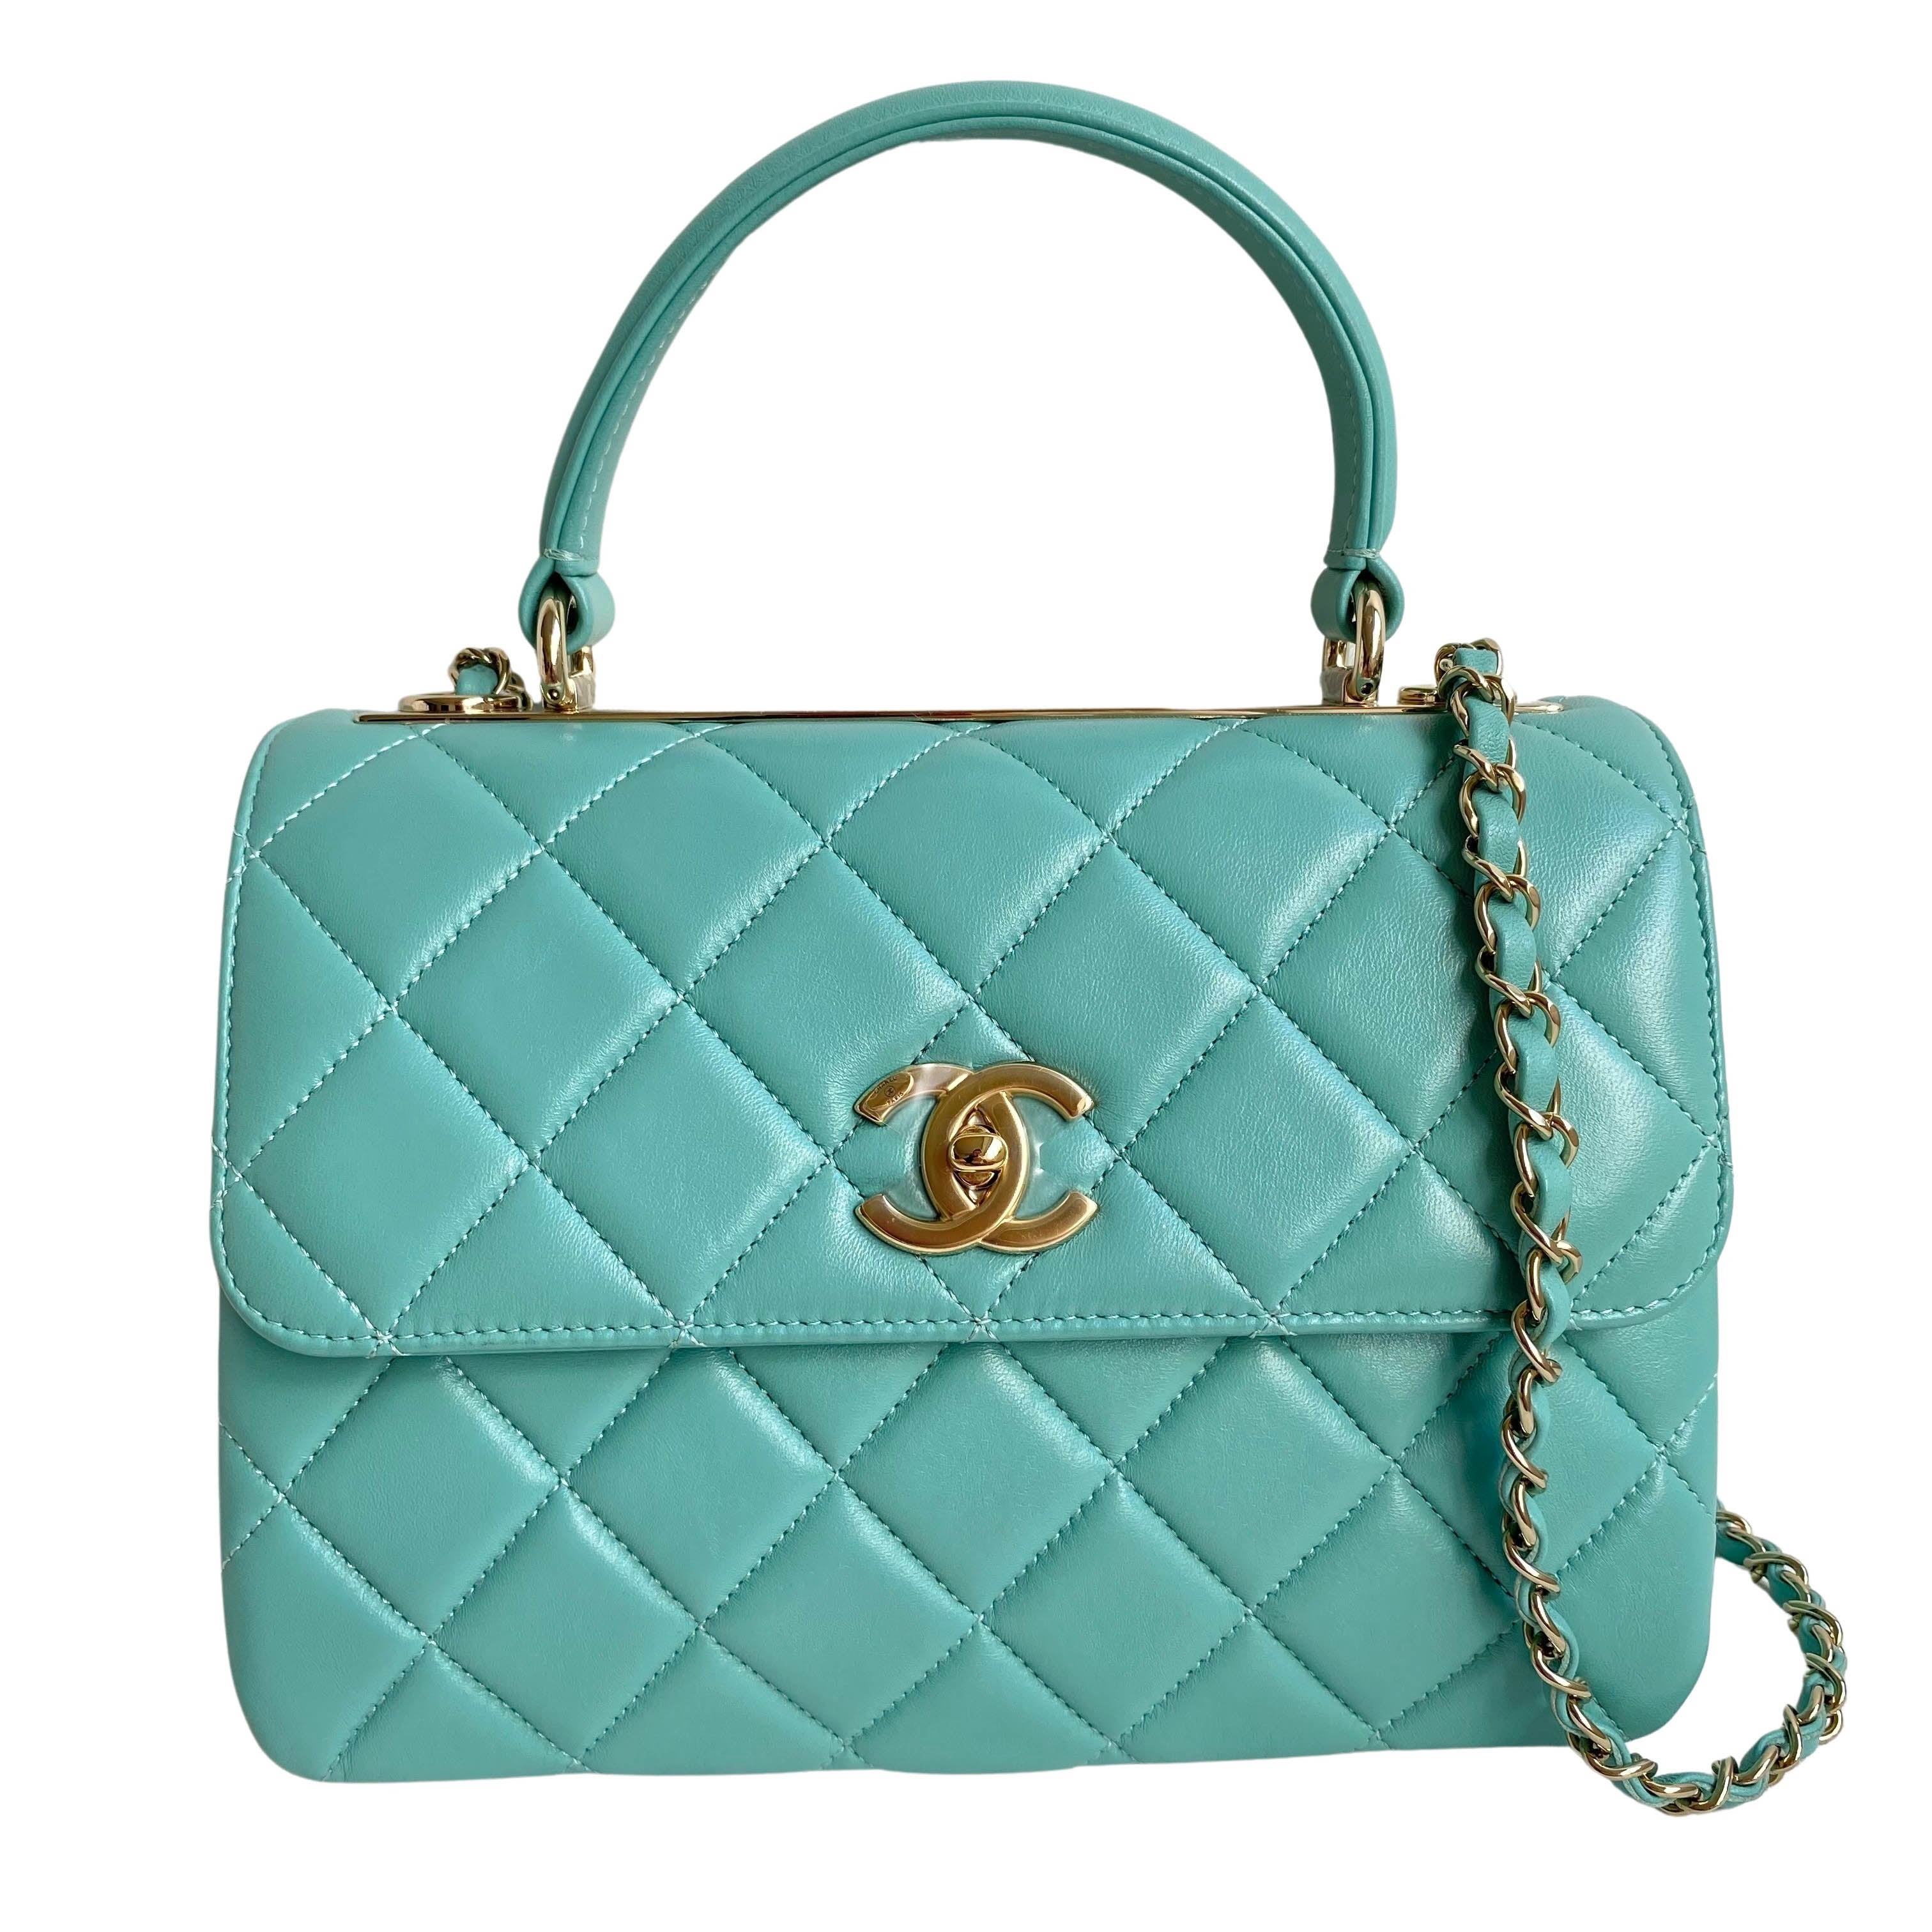 Chanel top Handle bag blue Tiffany  Chanel bag outfit, Chic outfits, Chanel  top